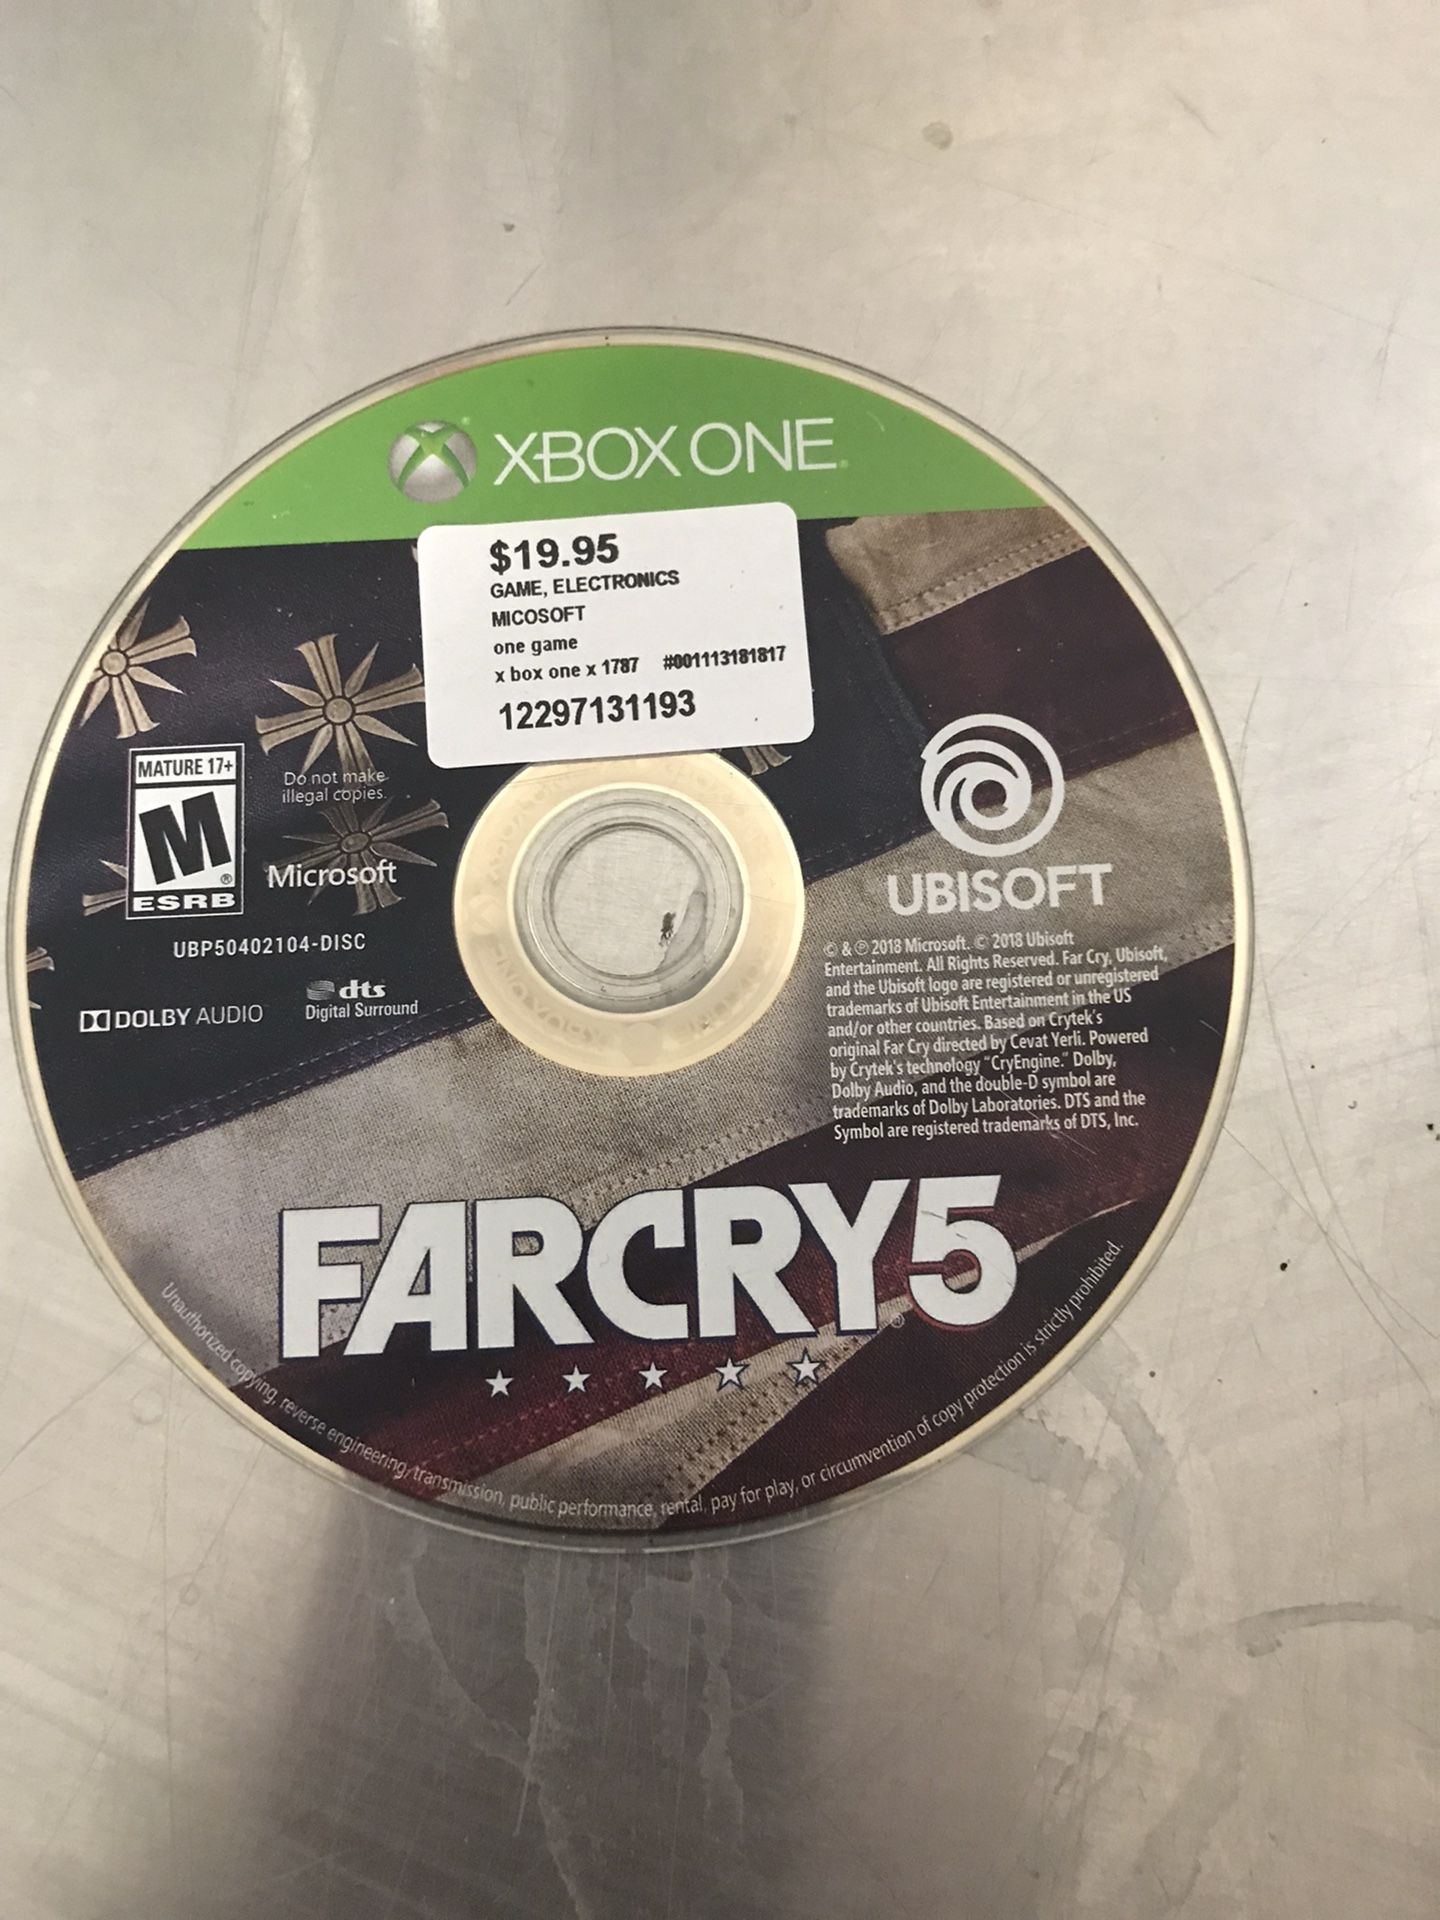 Xbox One FARCRY5 Game